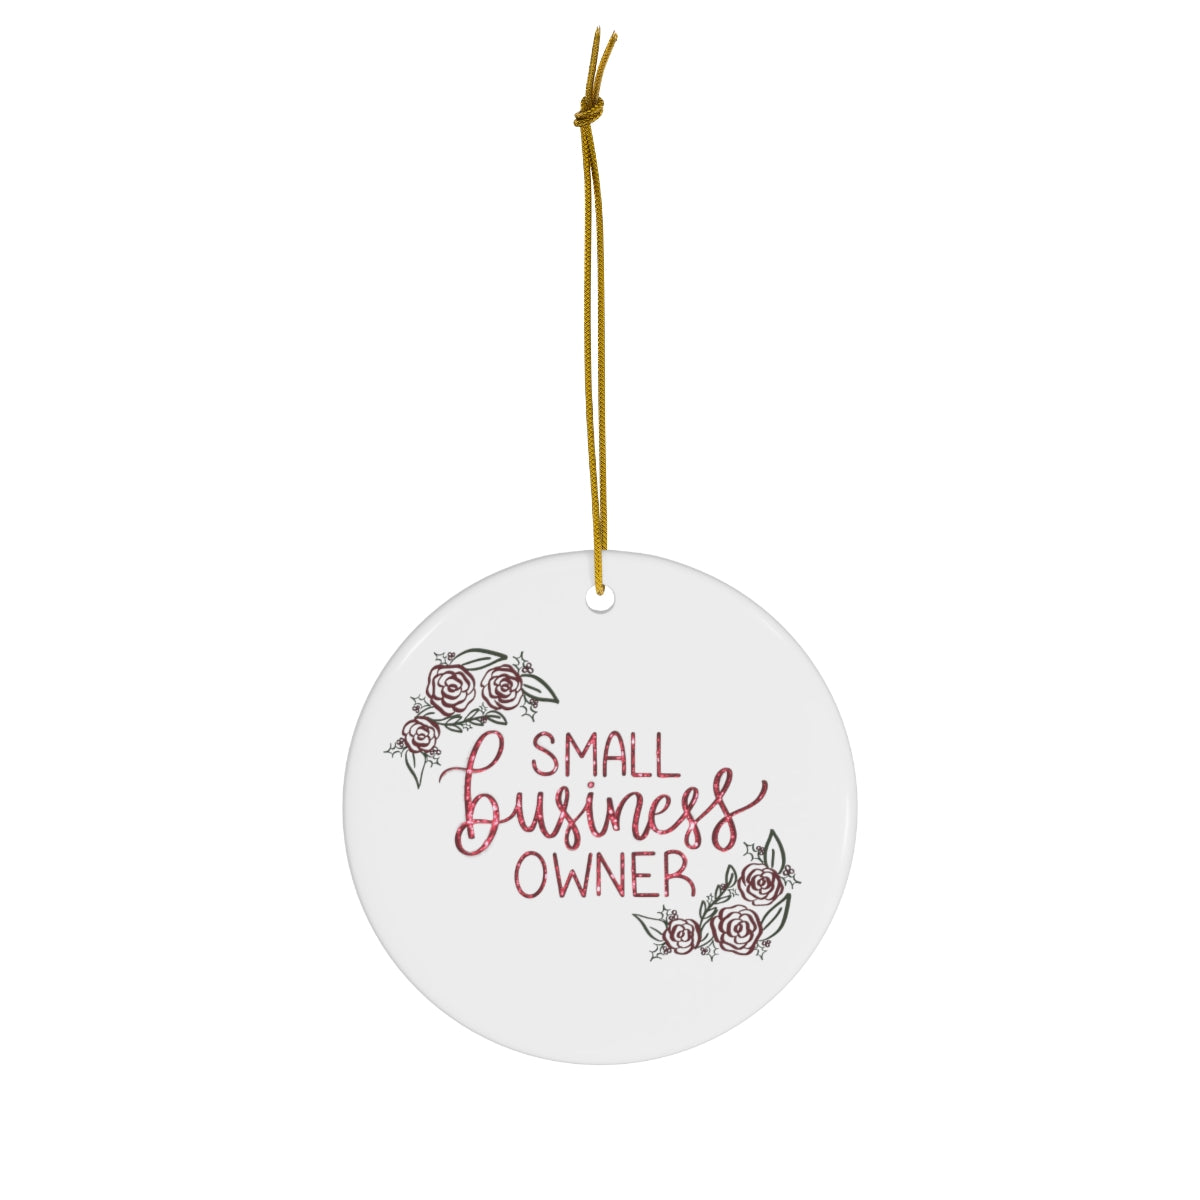 Small Business Owner Porcelain Ornament